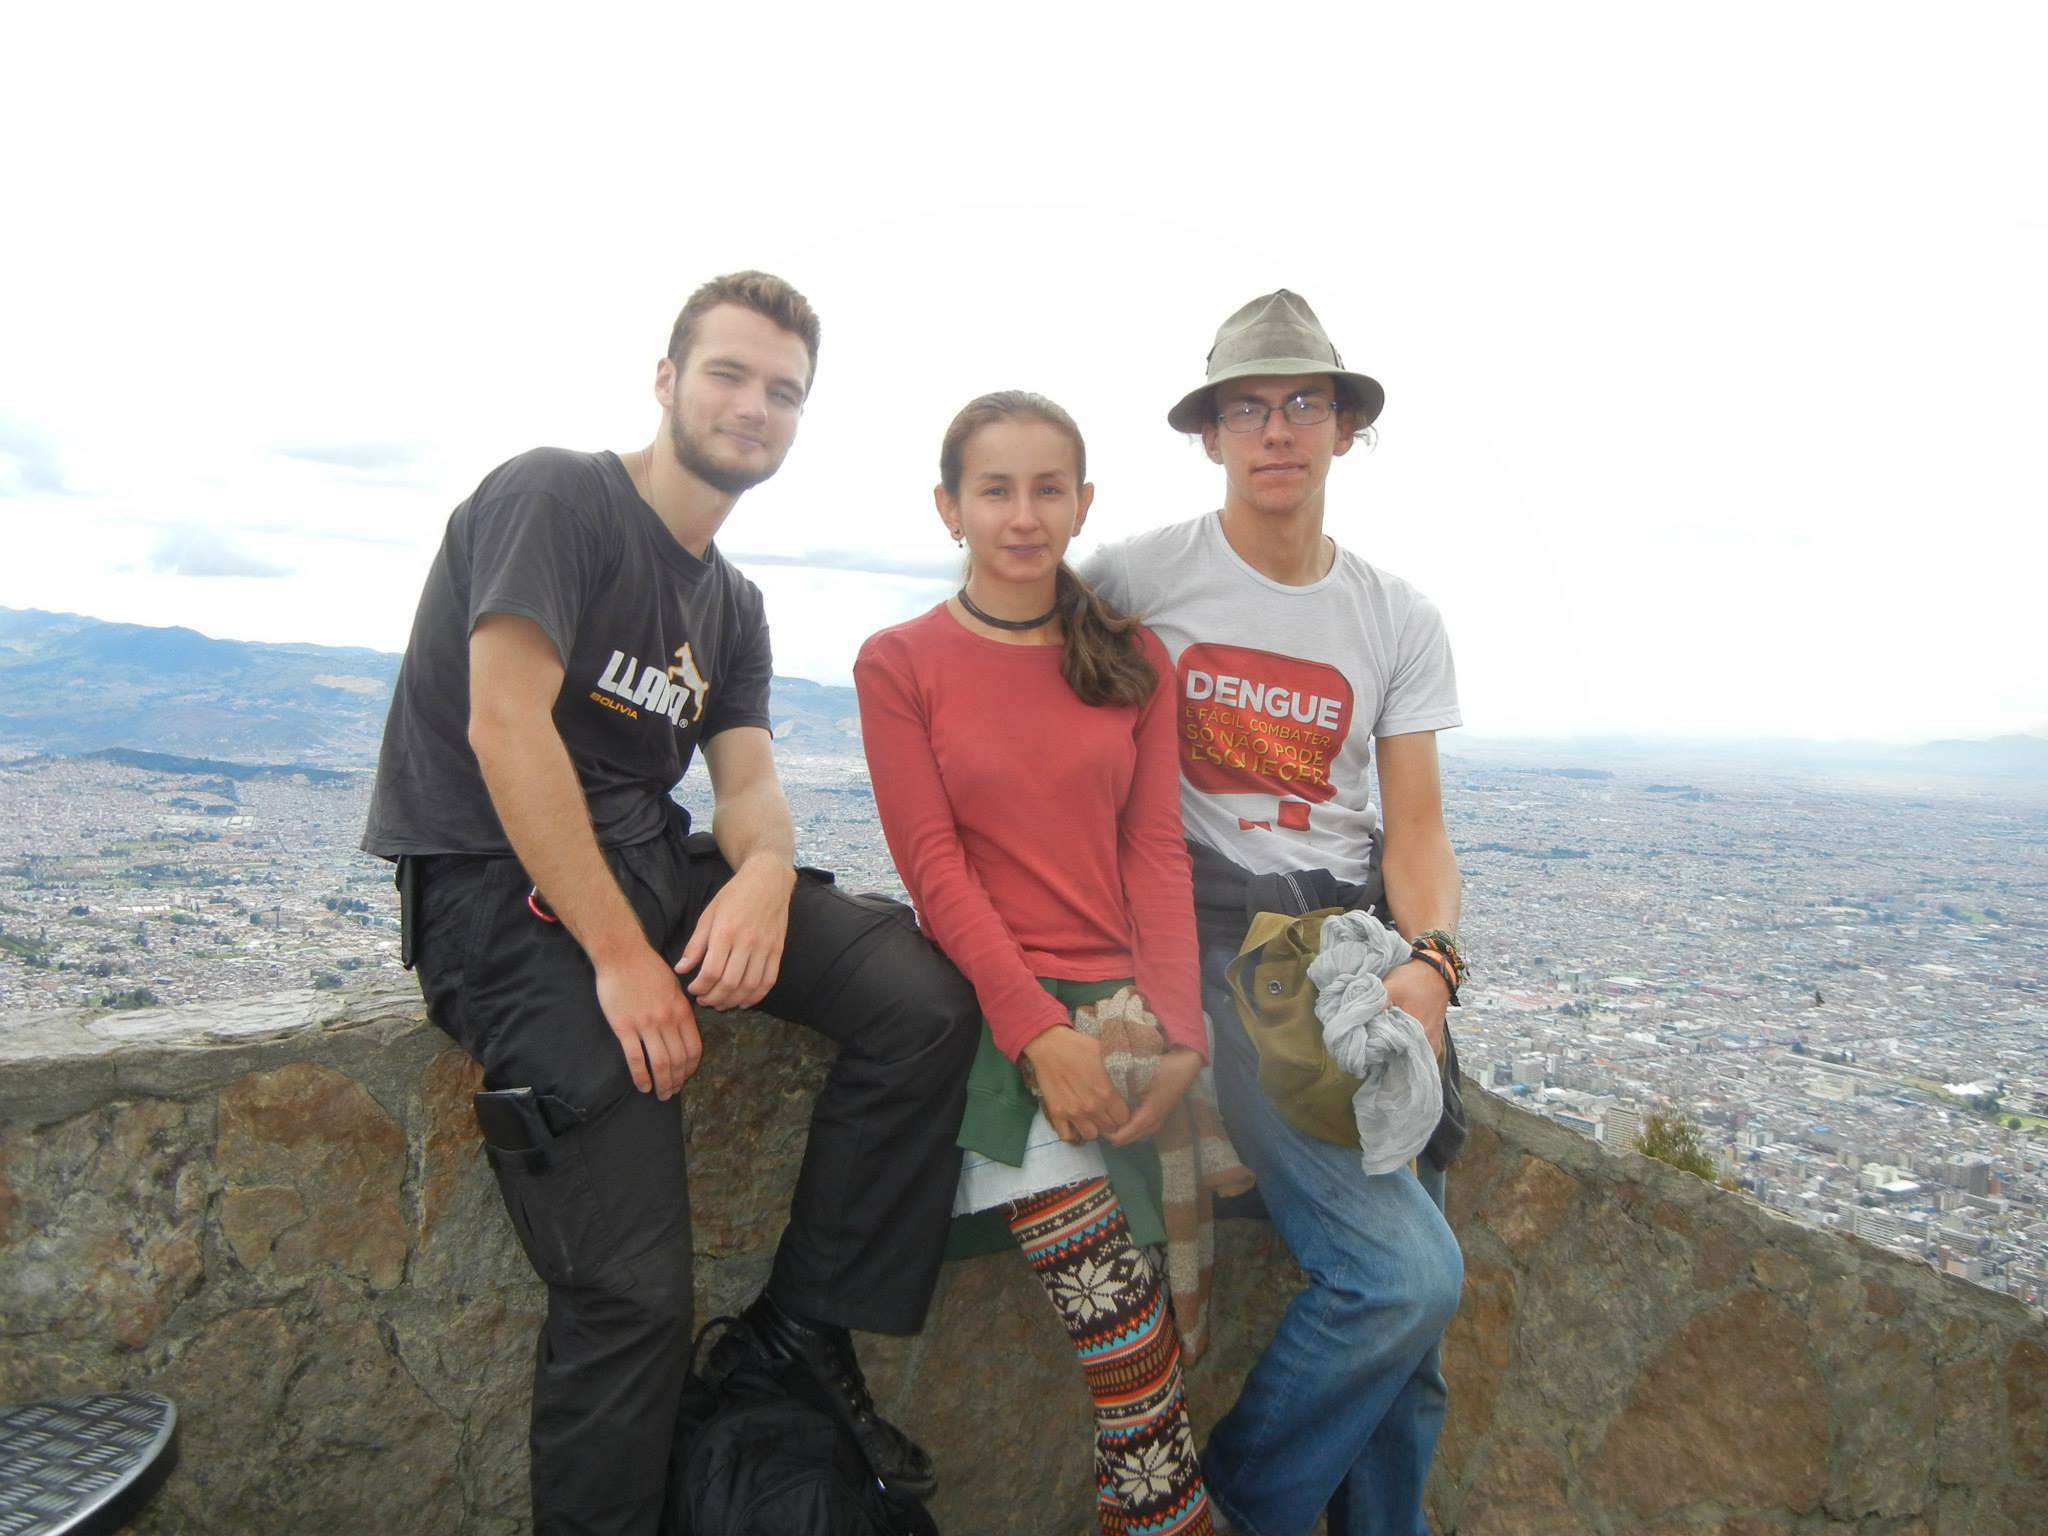 Peter, Pau, and me at Monserrate